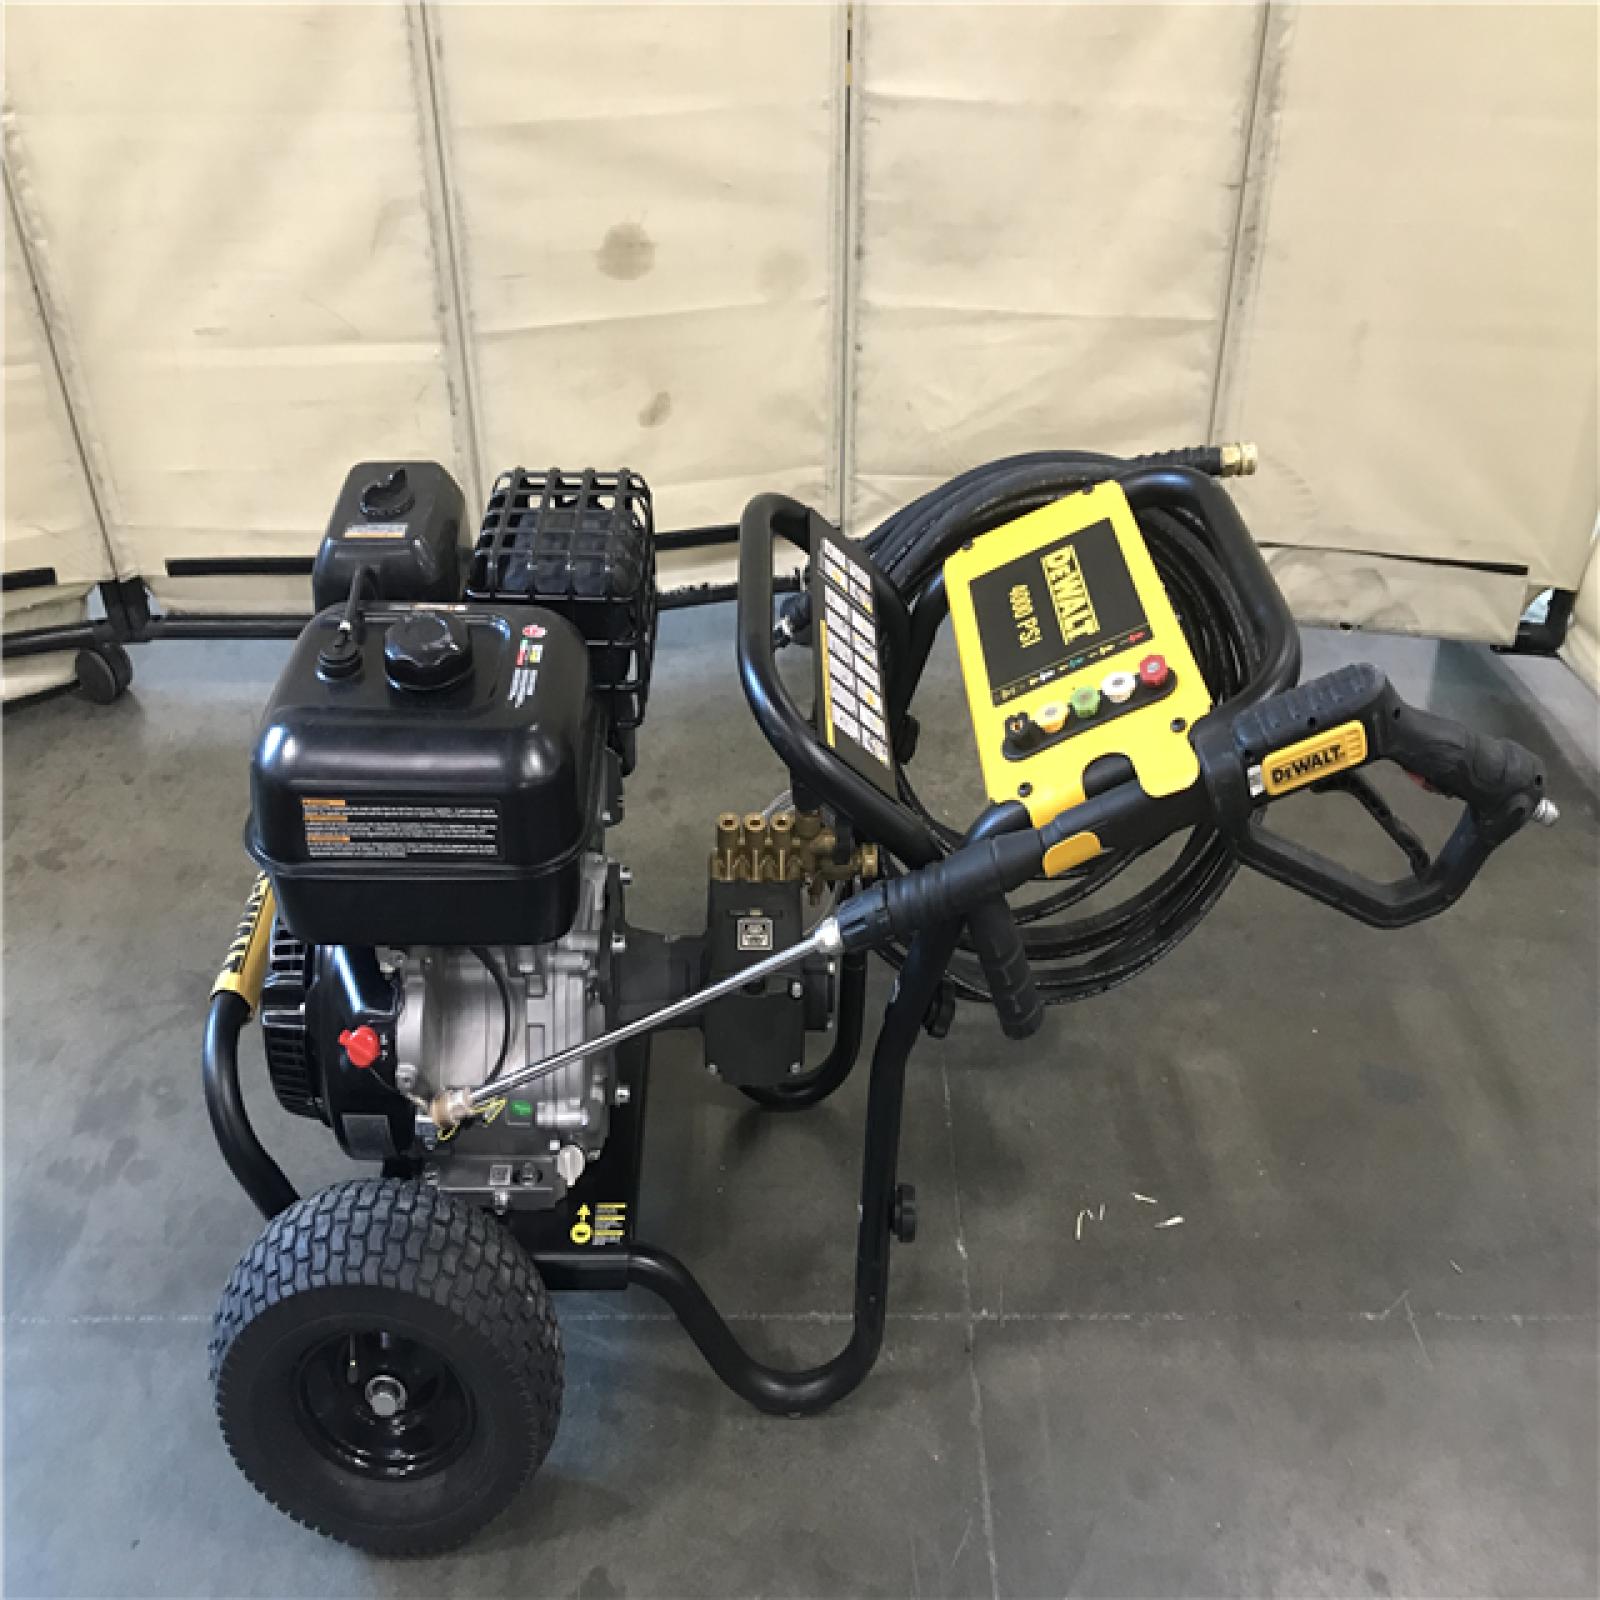 California AS-IS DeWALT 4000 PSI 3.5 GPM Cold Water Gas Pressure Washer